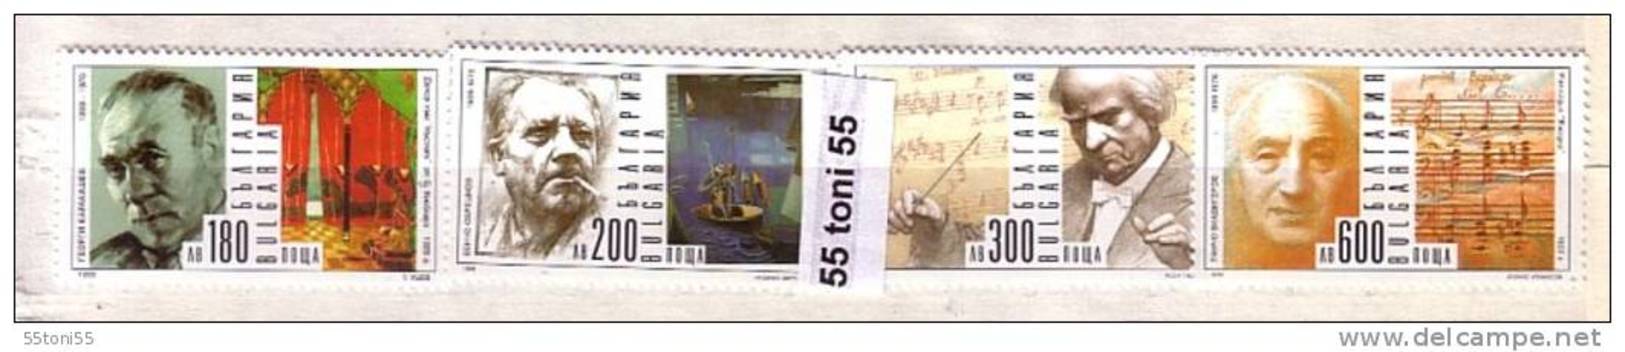 Bulgaria / Bulgarie 1999 Cultural Figures Painter Composer  4v.-MNH - Unused Stamps